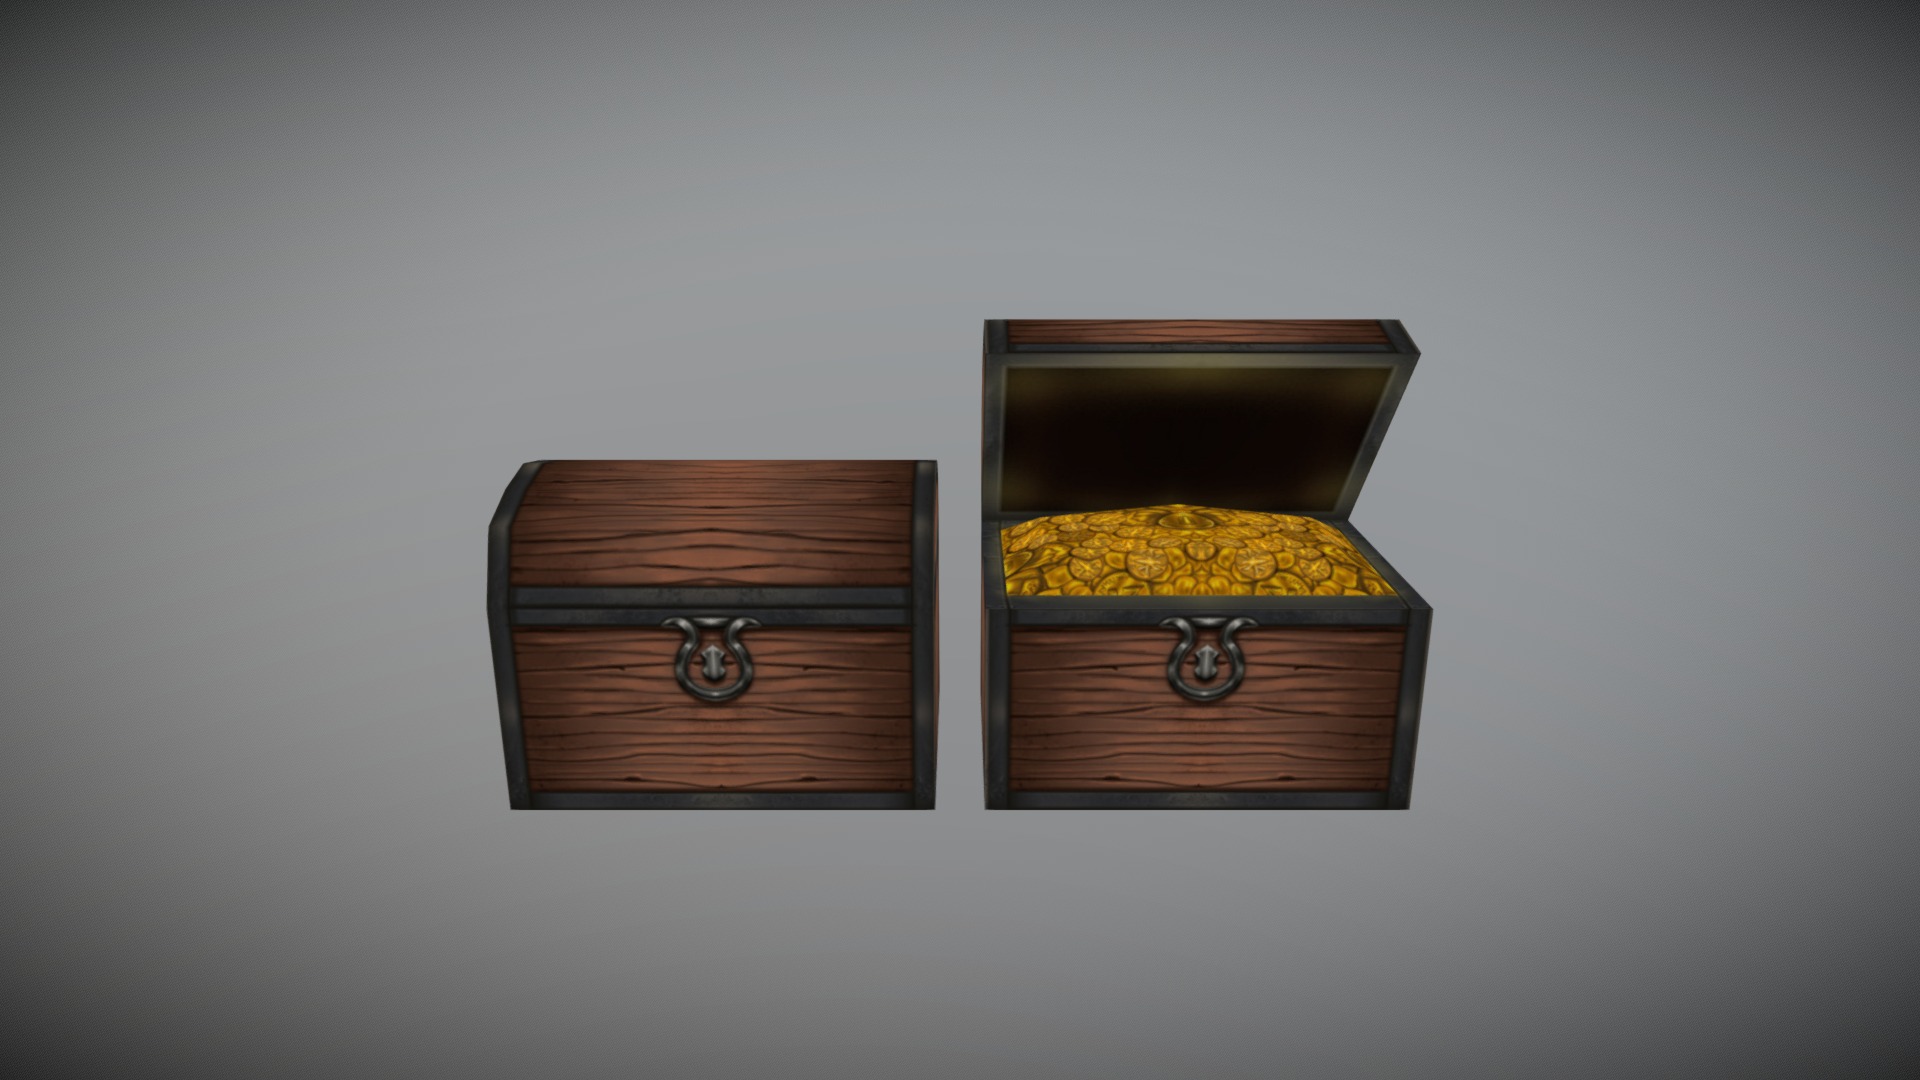 3D model Treasure Box - This is a 3D model of the Treasure Box. The 3D model is about two wooden rectangular objects with a yellow substance in them.